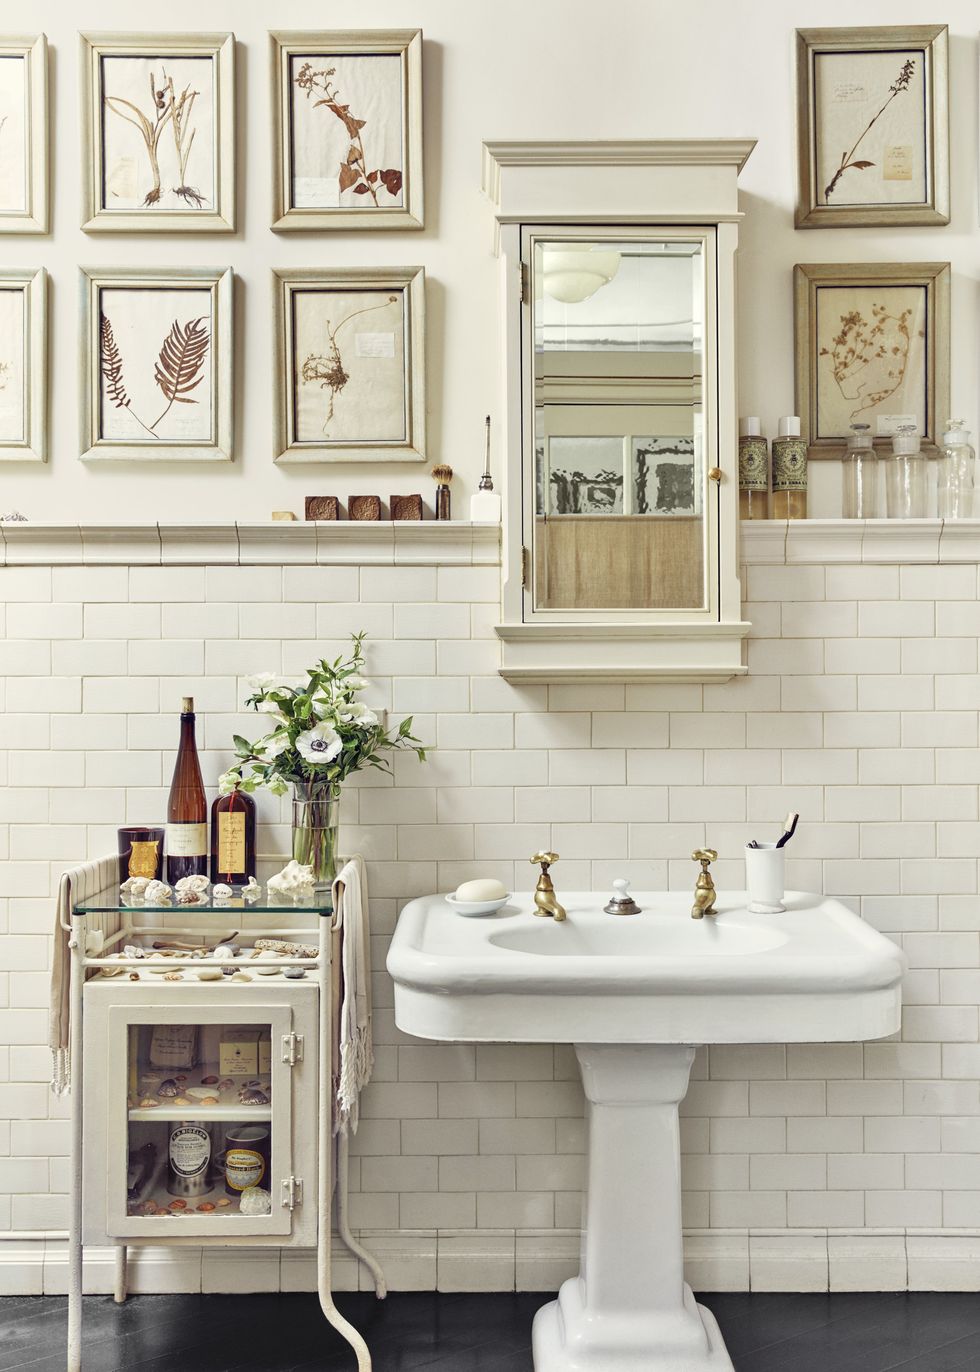 8 Small Bathroom Decorating Ideas You Have to Try